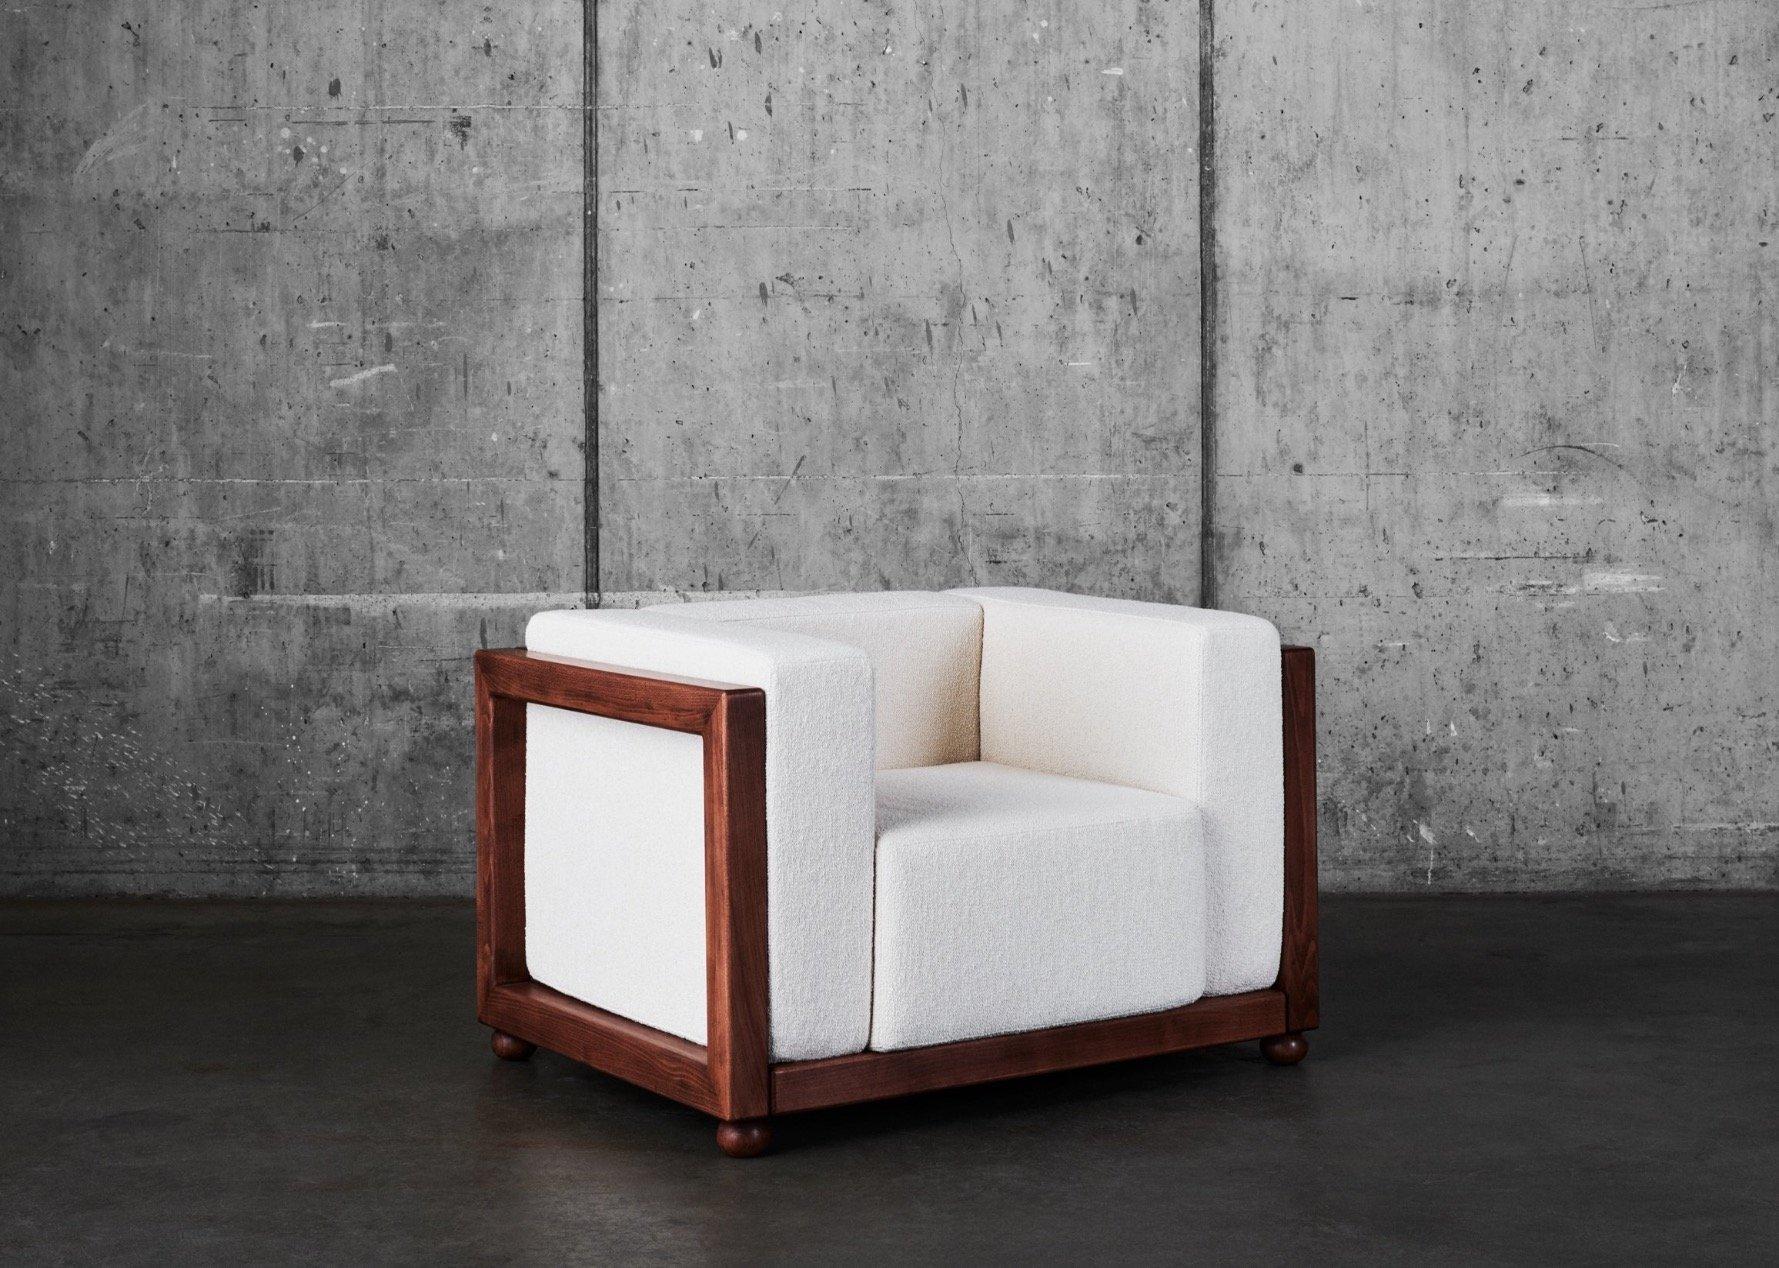 DD Frame lounge chair is a continuation of the DD Frame Sofa 3-Seater with the same expression. The DD Frame Lounge chair is made by hand in Bosnia and Herzegovina by skilled craftsmen. The frame is made of solid beech stained in a dark tone to